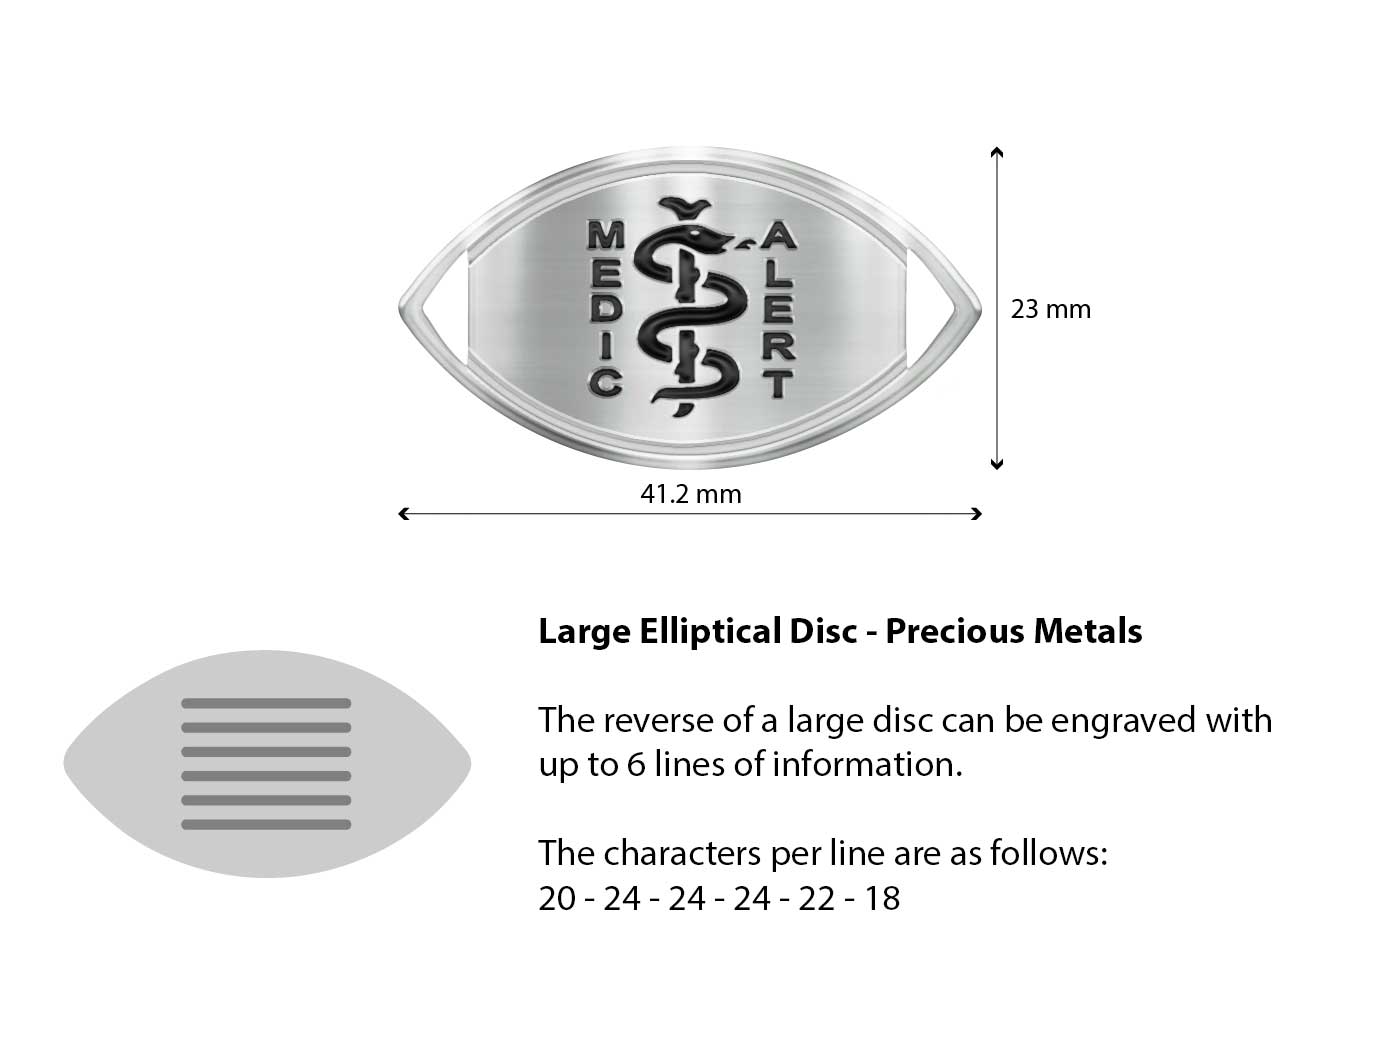 Diagram of the MedicAlert precious metal large elliptical disc with measurements and descriptions of the engraving specifications